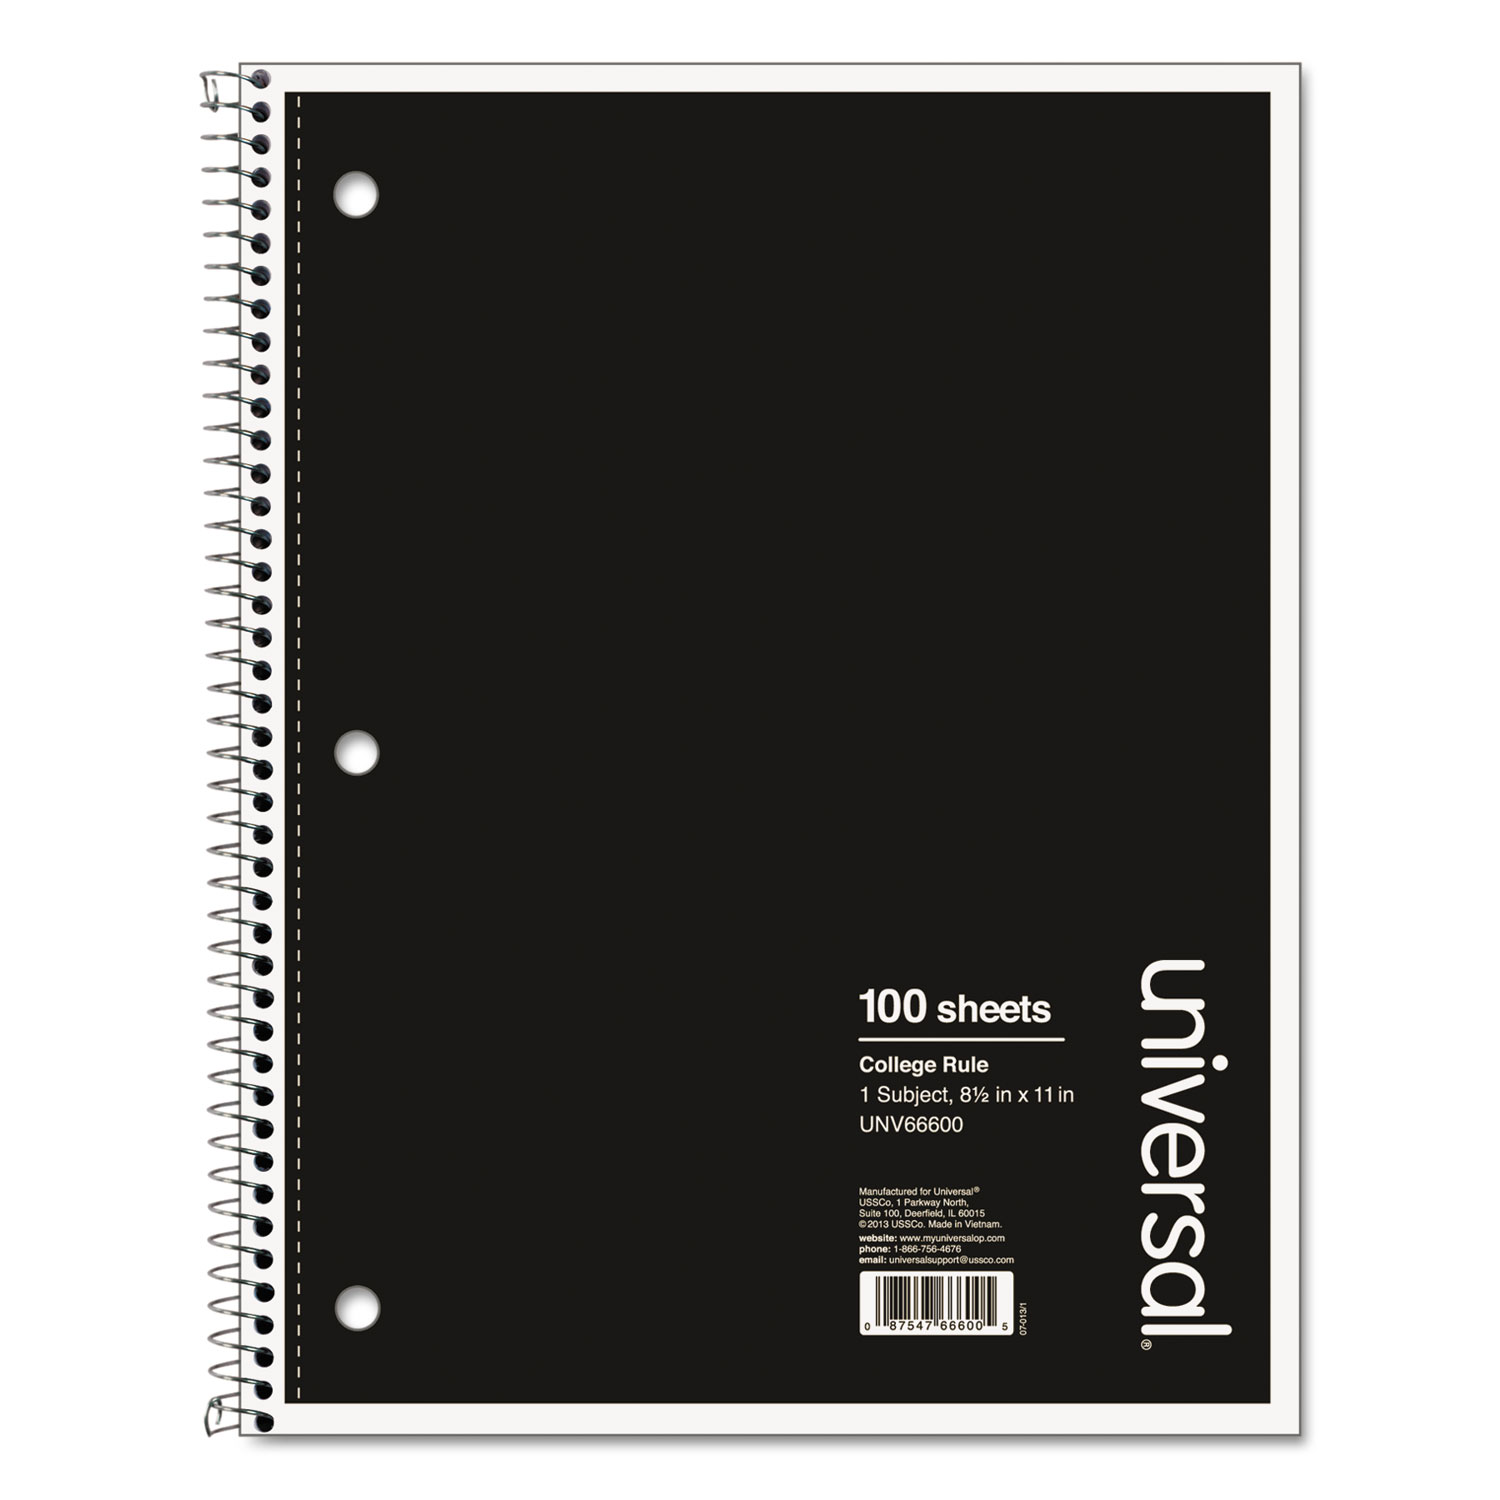  Universal UNV66600 Wirebound Notebook, 1 Subject, Medium/College Rule, Black Cover, 11 x 8.5, 100 Sheets (UNV66600) 